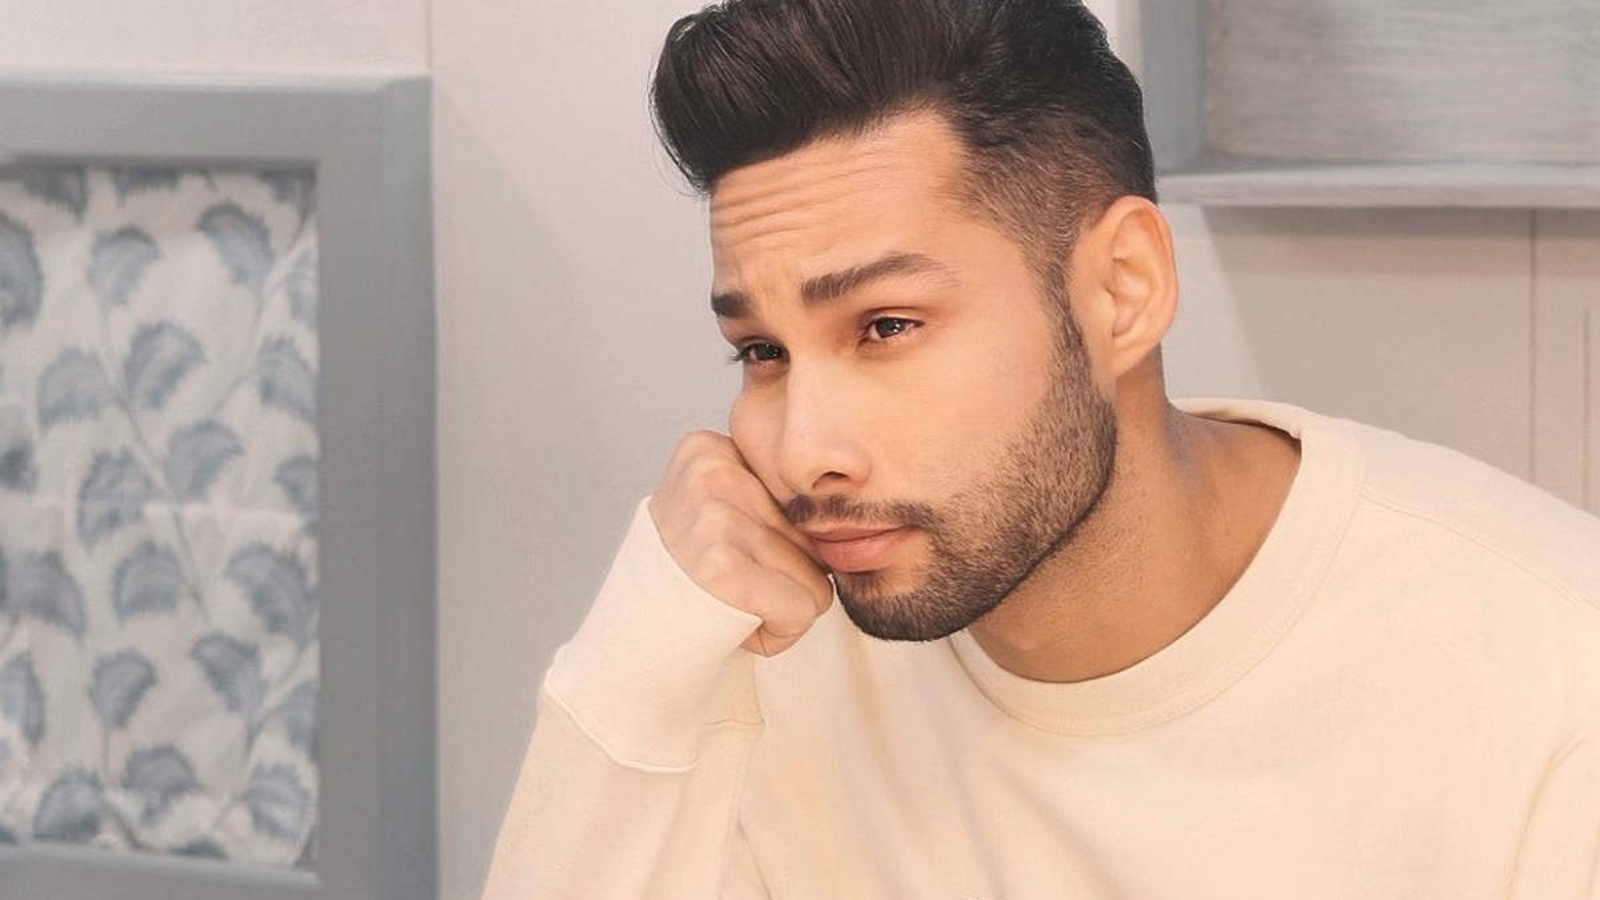 Siddhant Chaturvedi says his breakup with girlfriend of 4 years changed him: ‘I wanted to settle down’